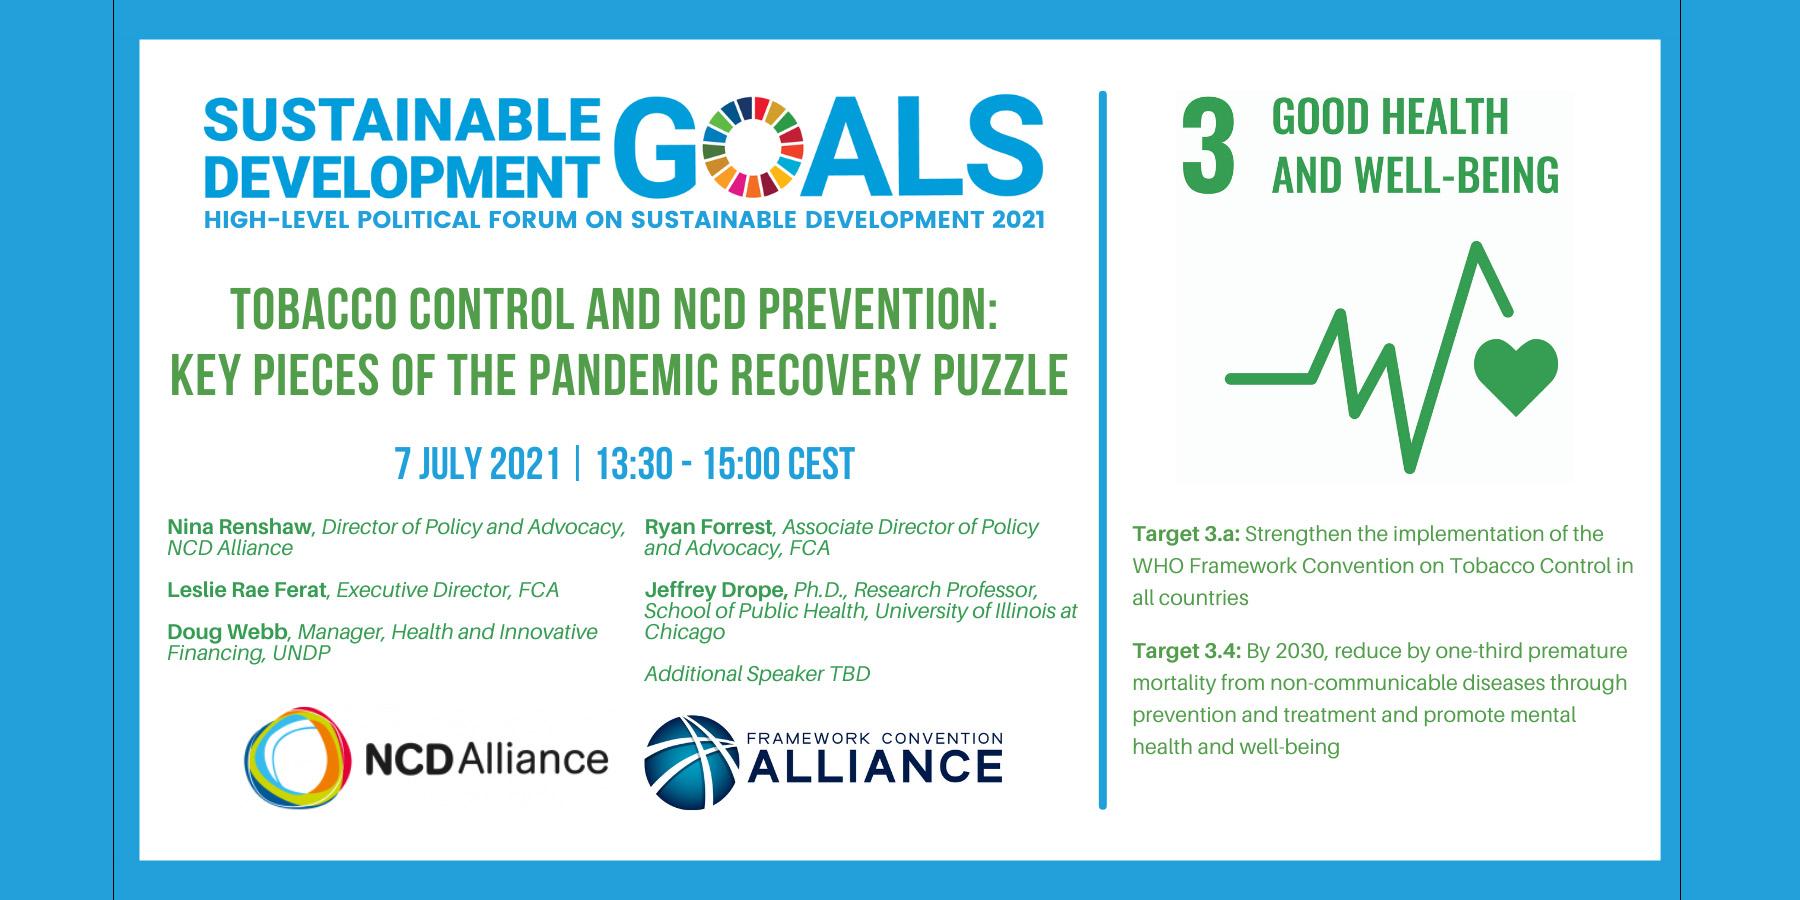 Tobacco control and NCD prevention event flyer